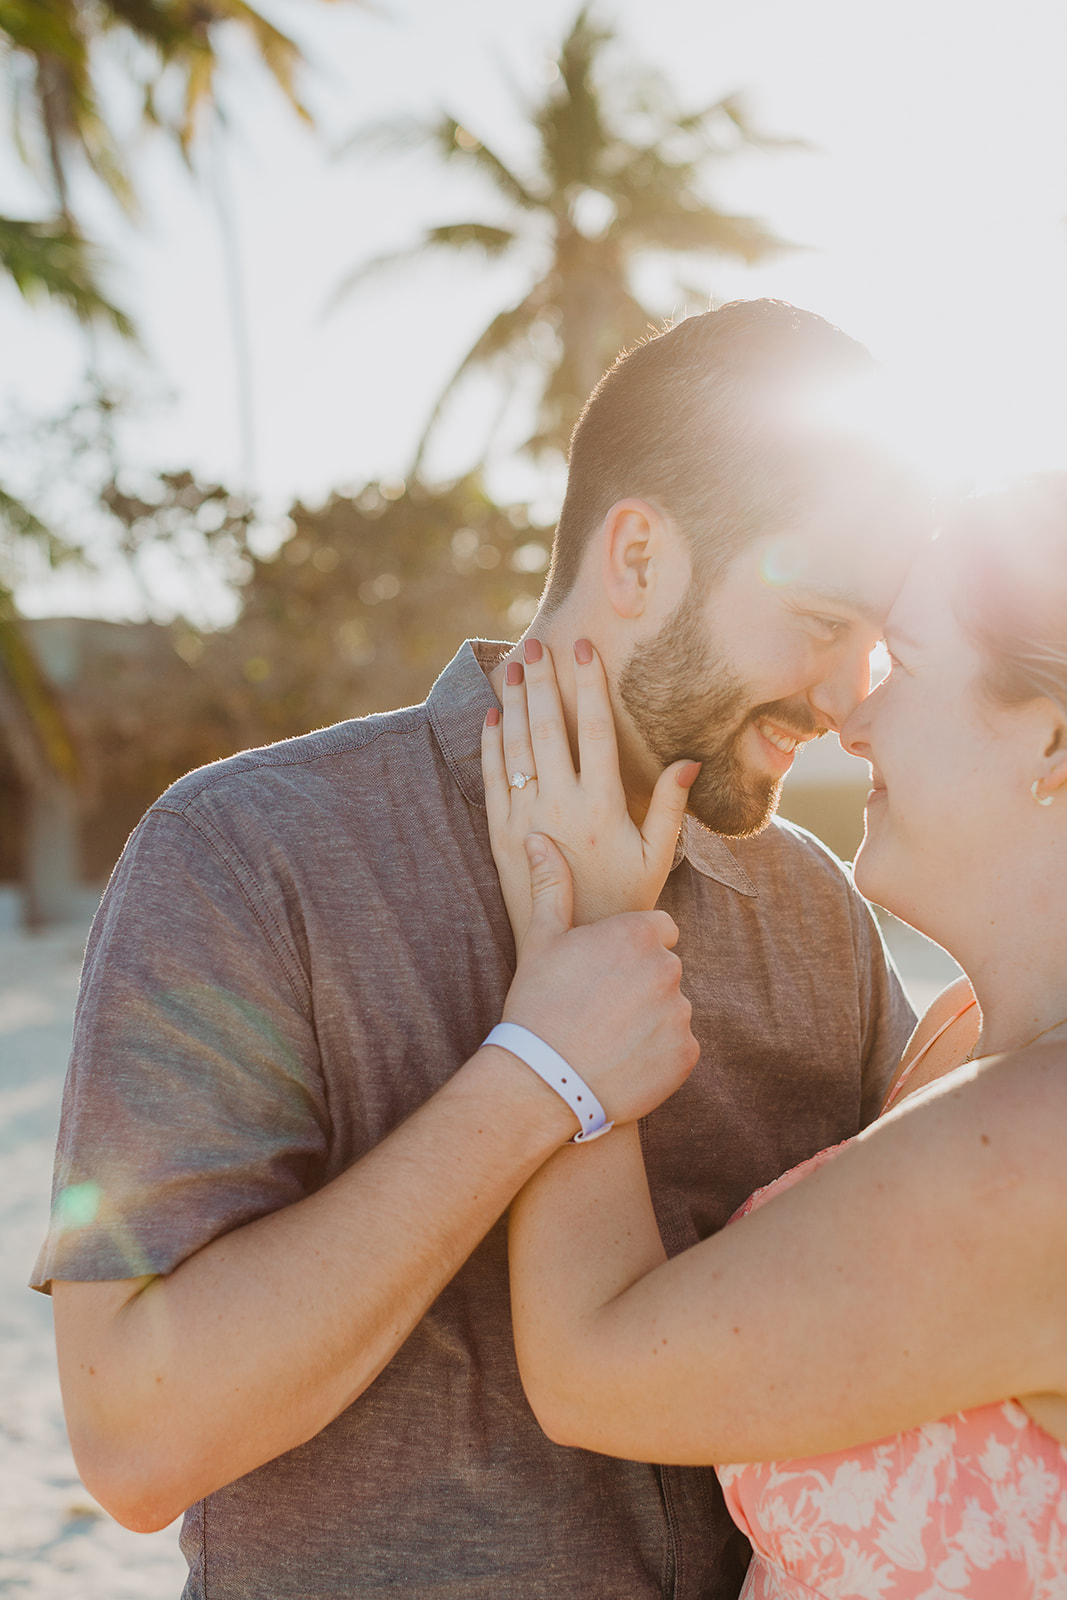 sunset light filtering through the trees on the beach in Punta Cana moments after he proposed